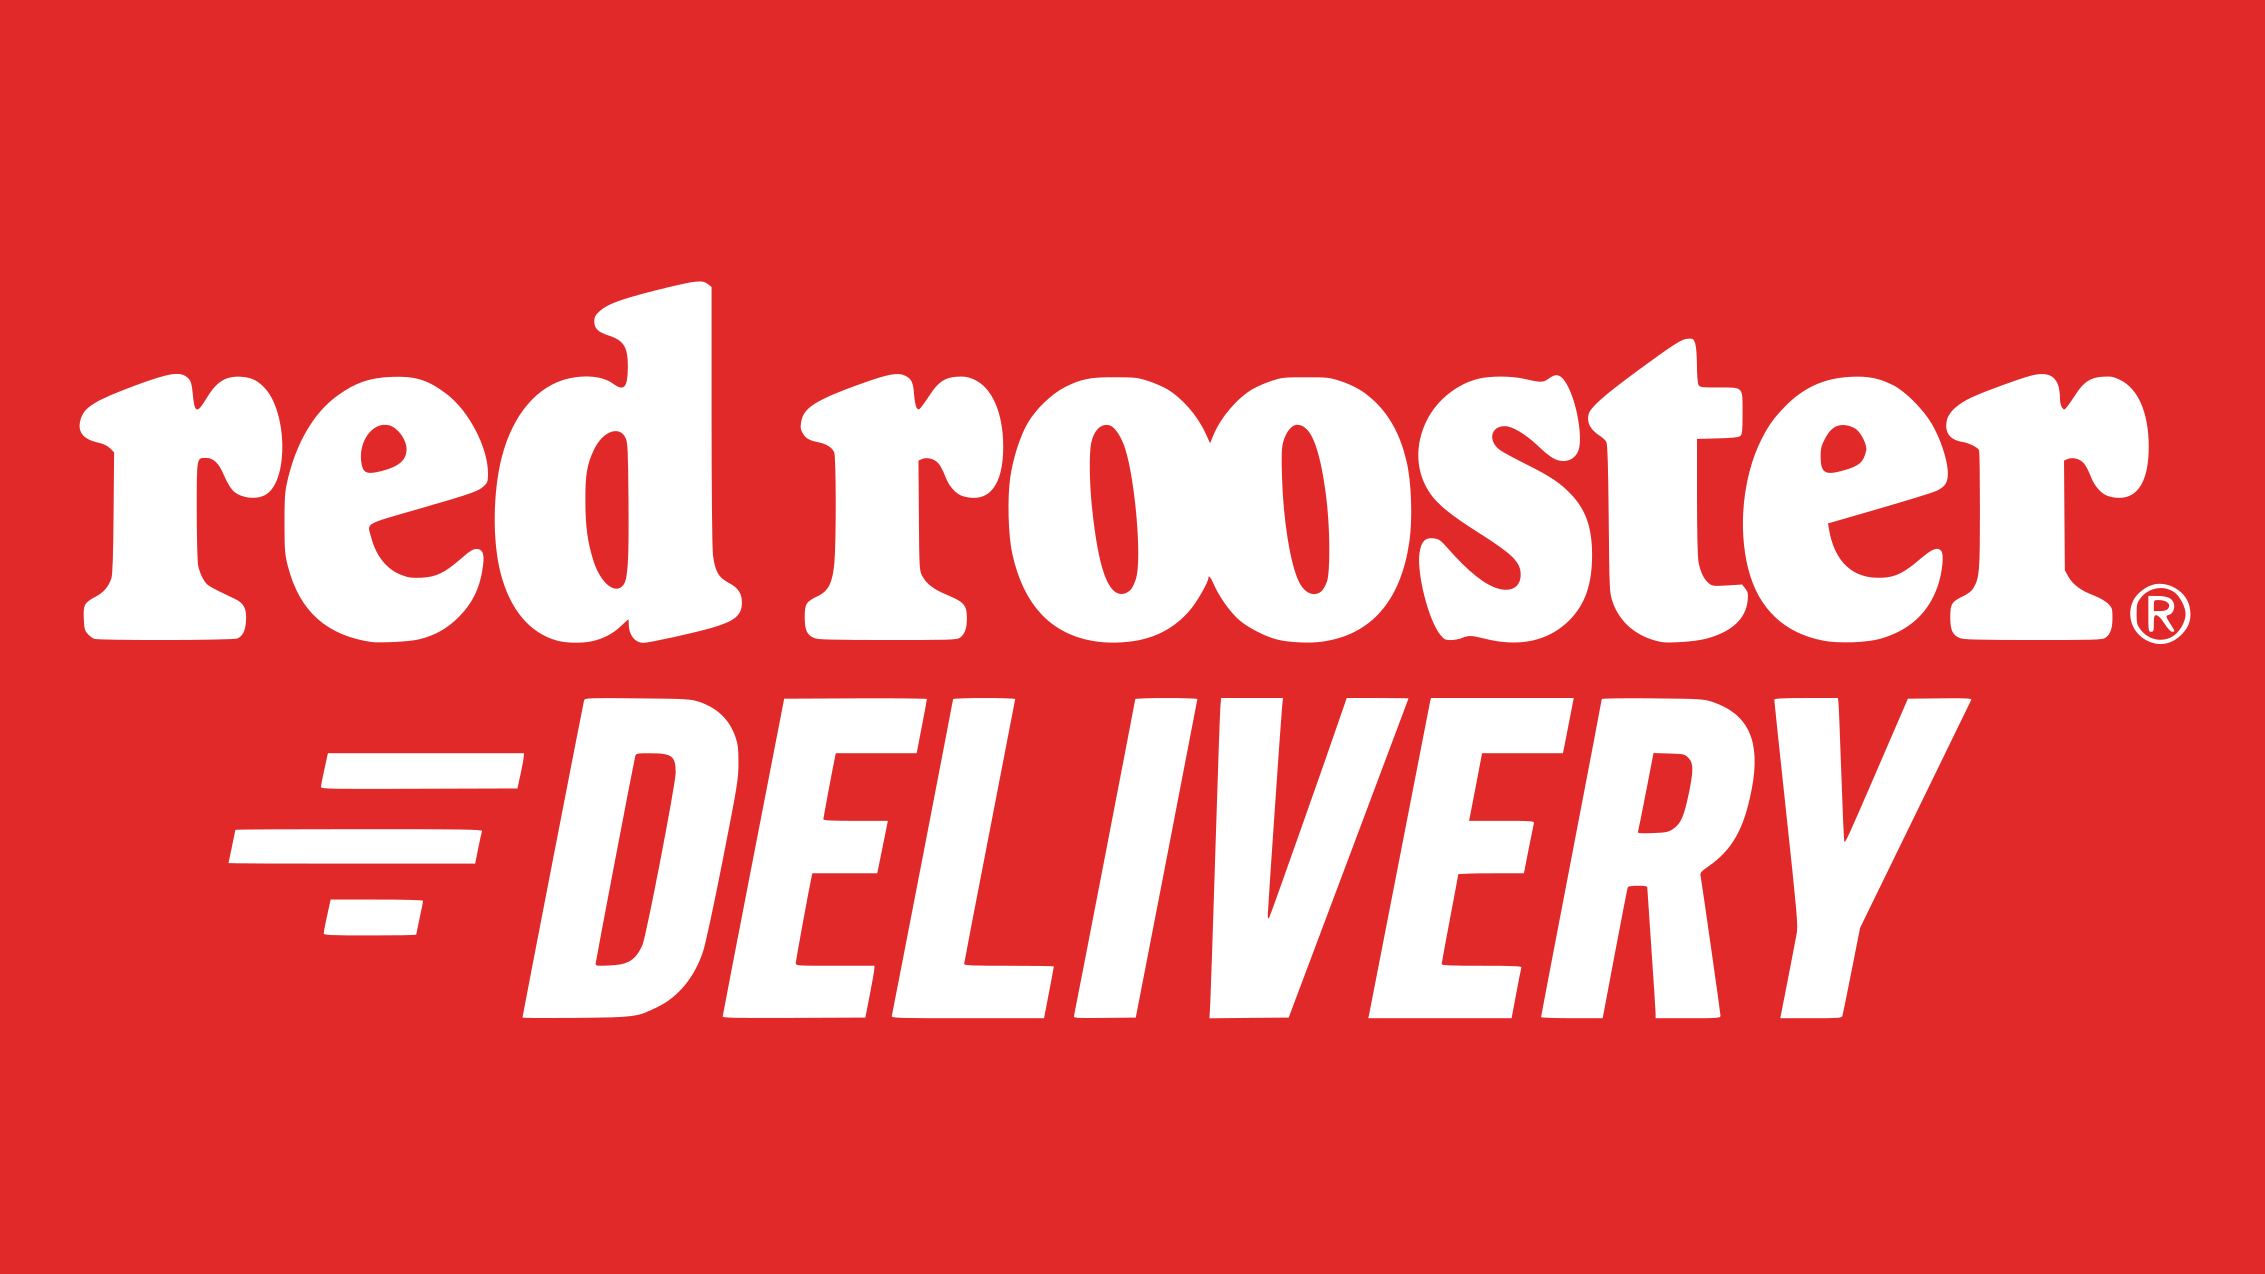 Red Rooster Delivery (Screen)